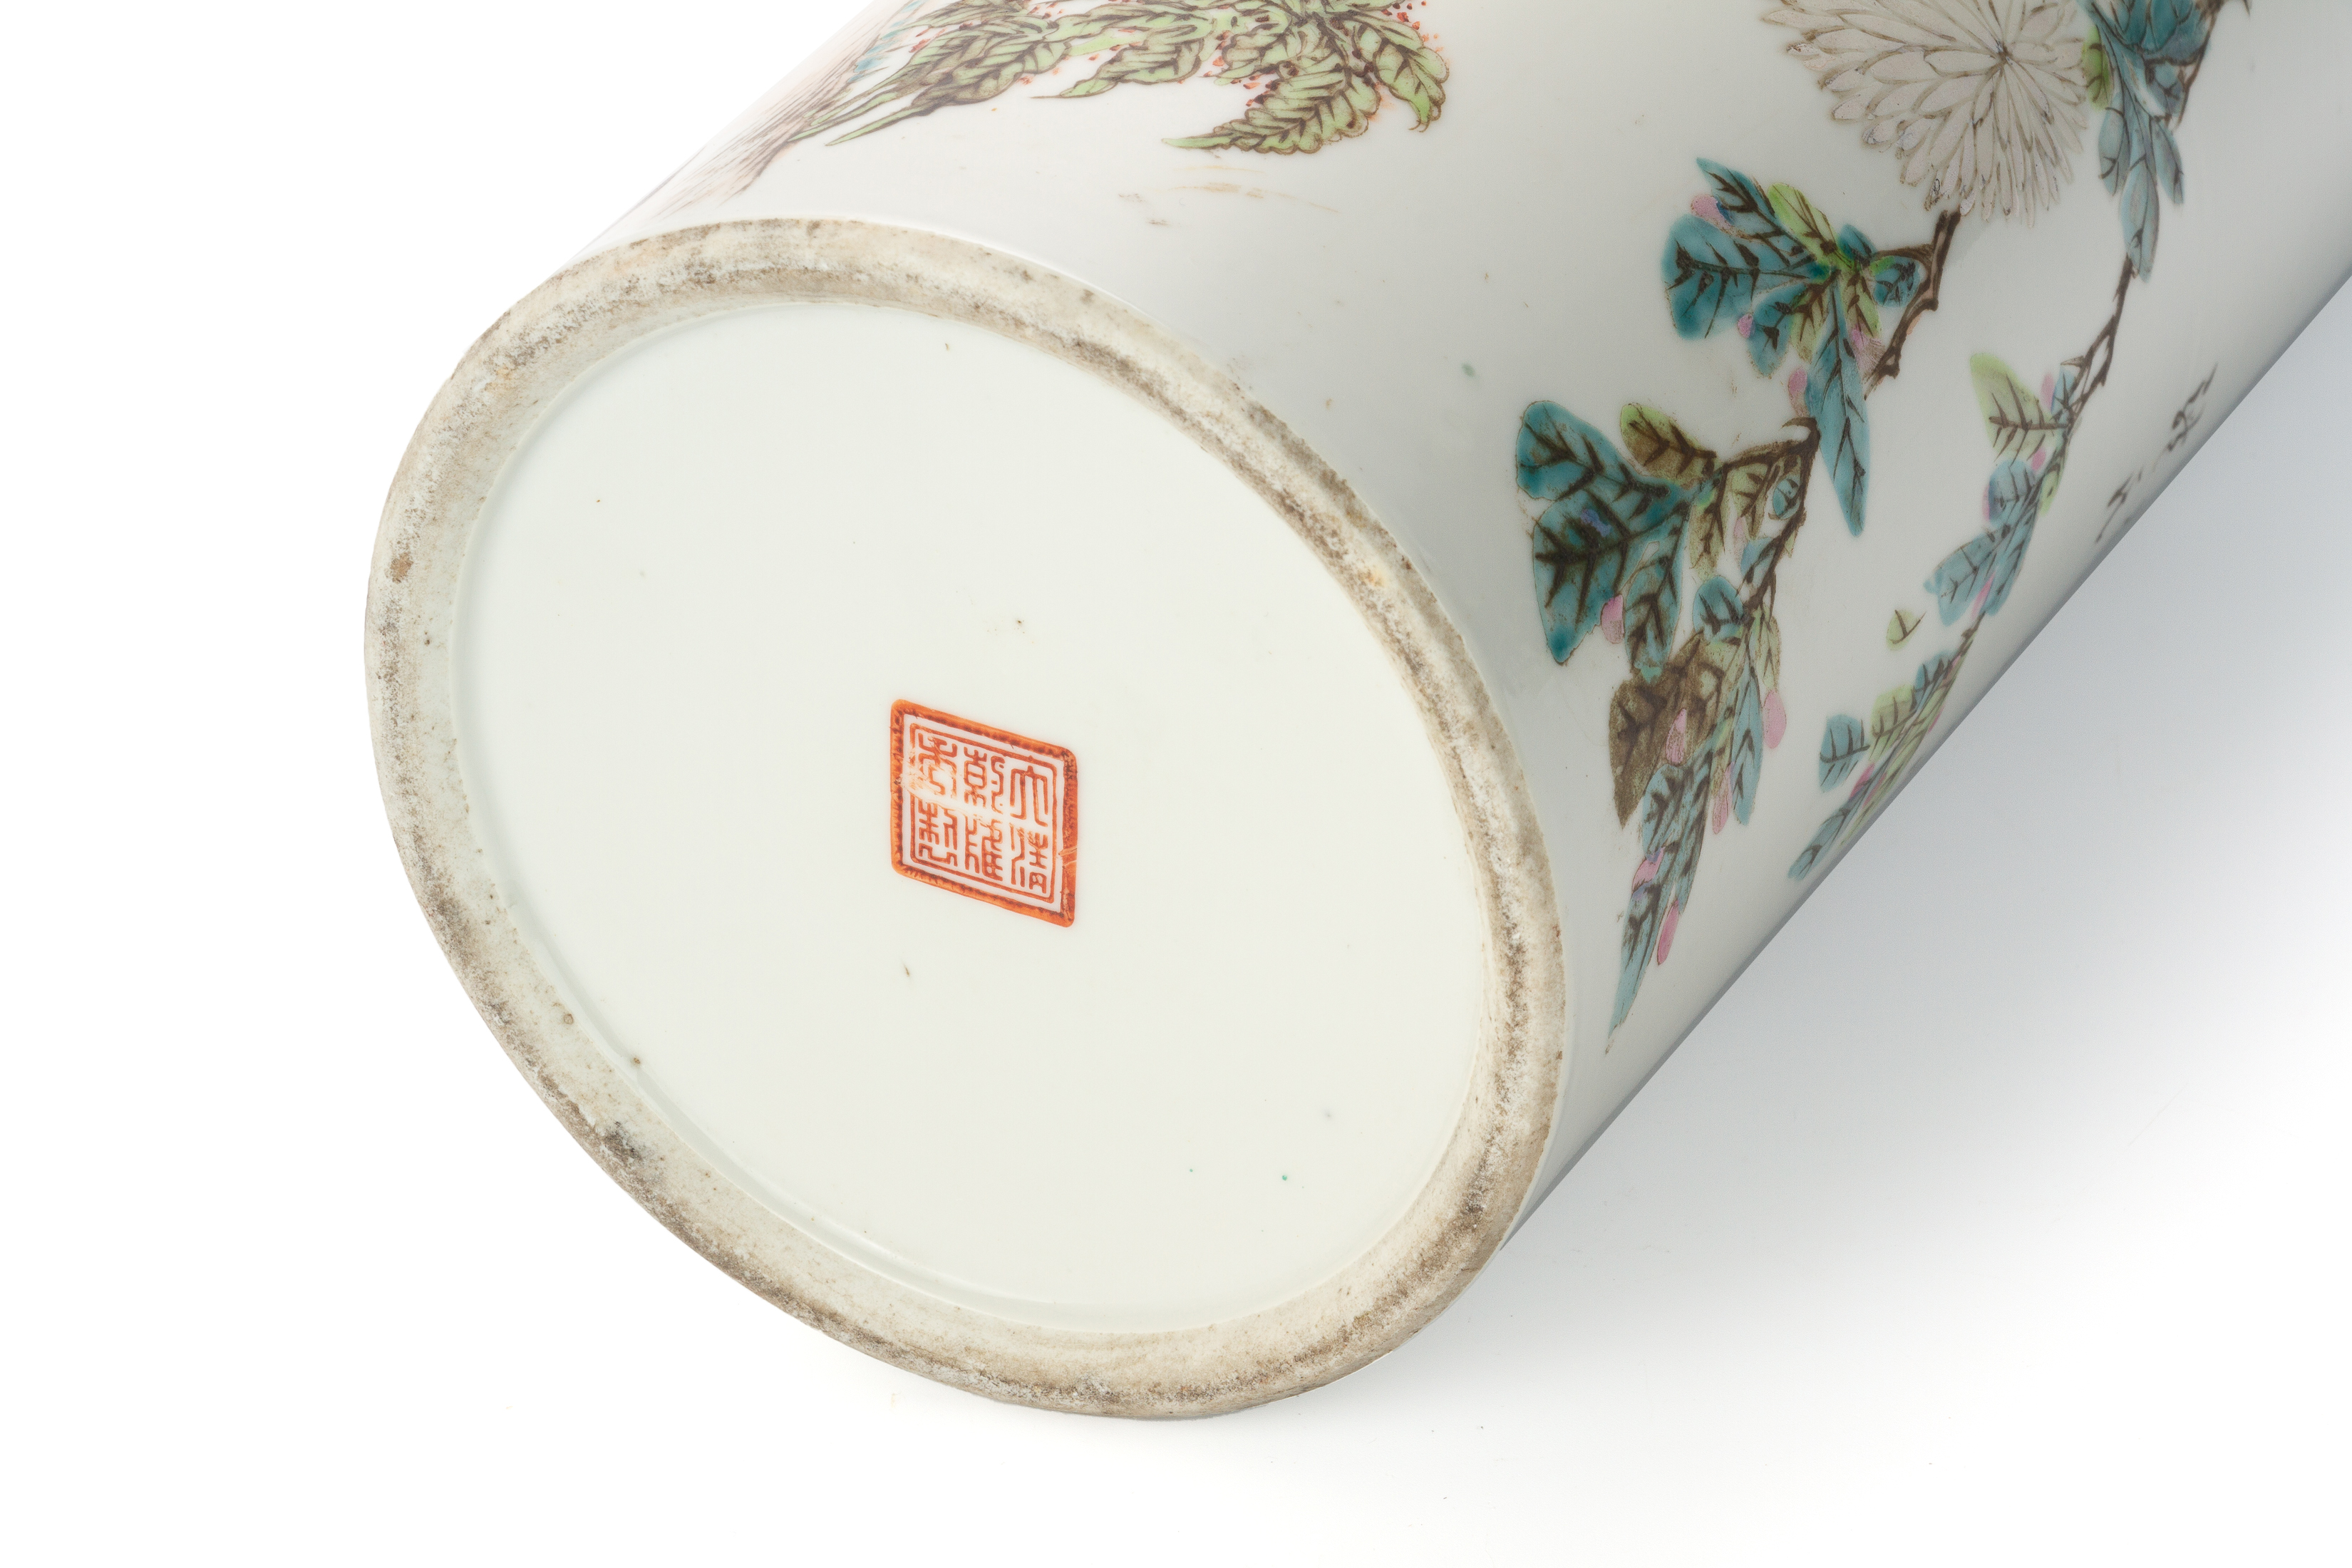 A QIANJIAN STLYE PORCELAIN CYLINDRICAL VASE OR HAT STAND - Image 3 of 7